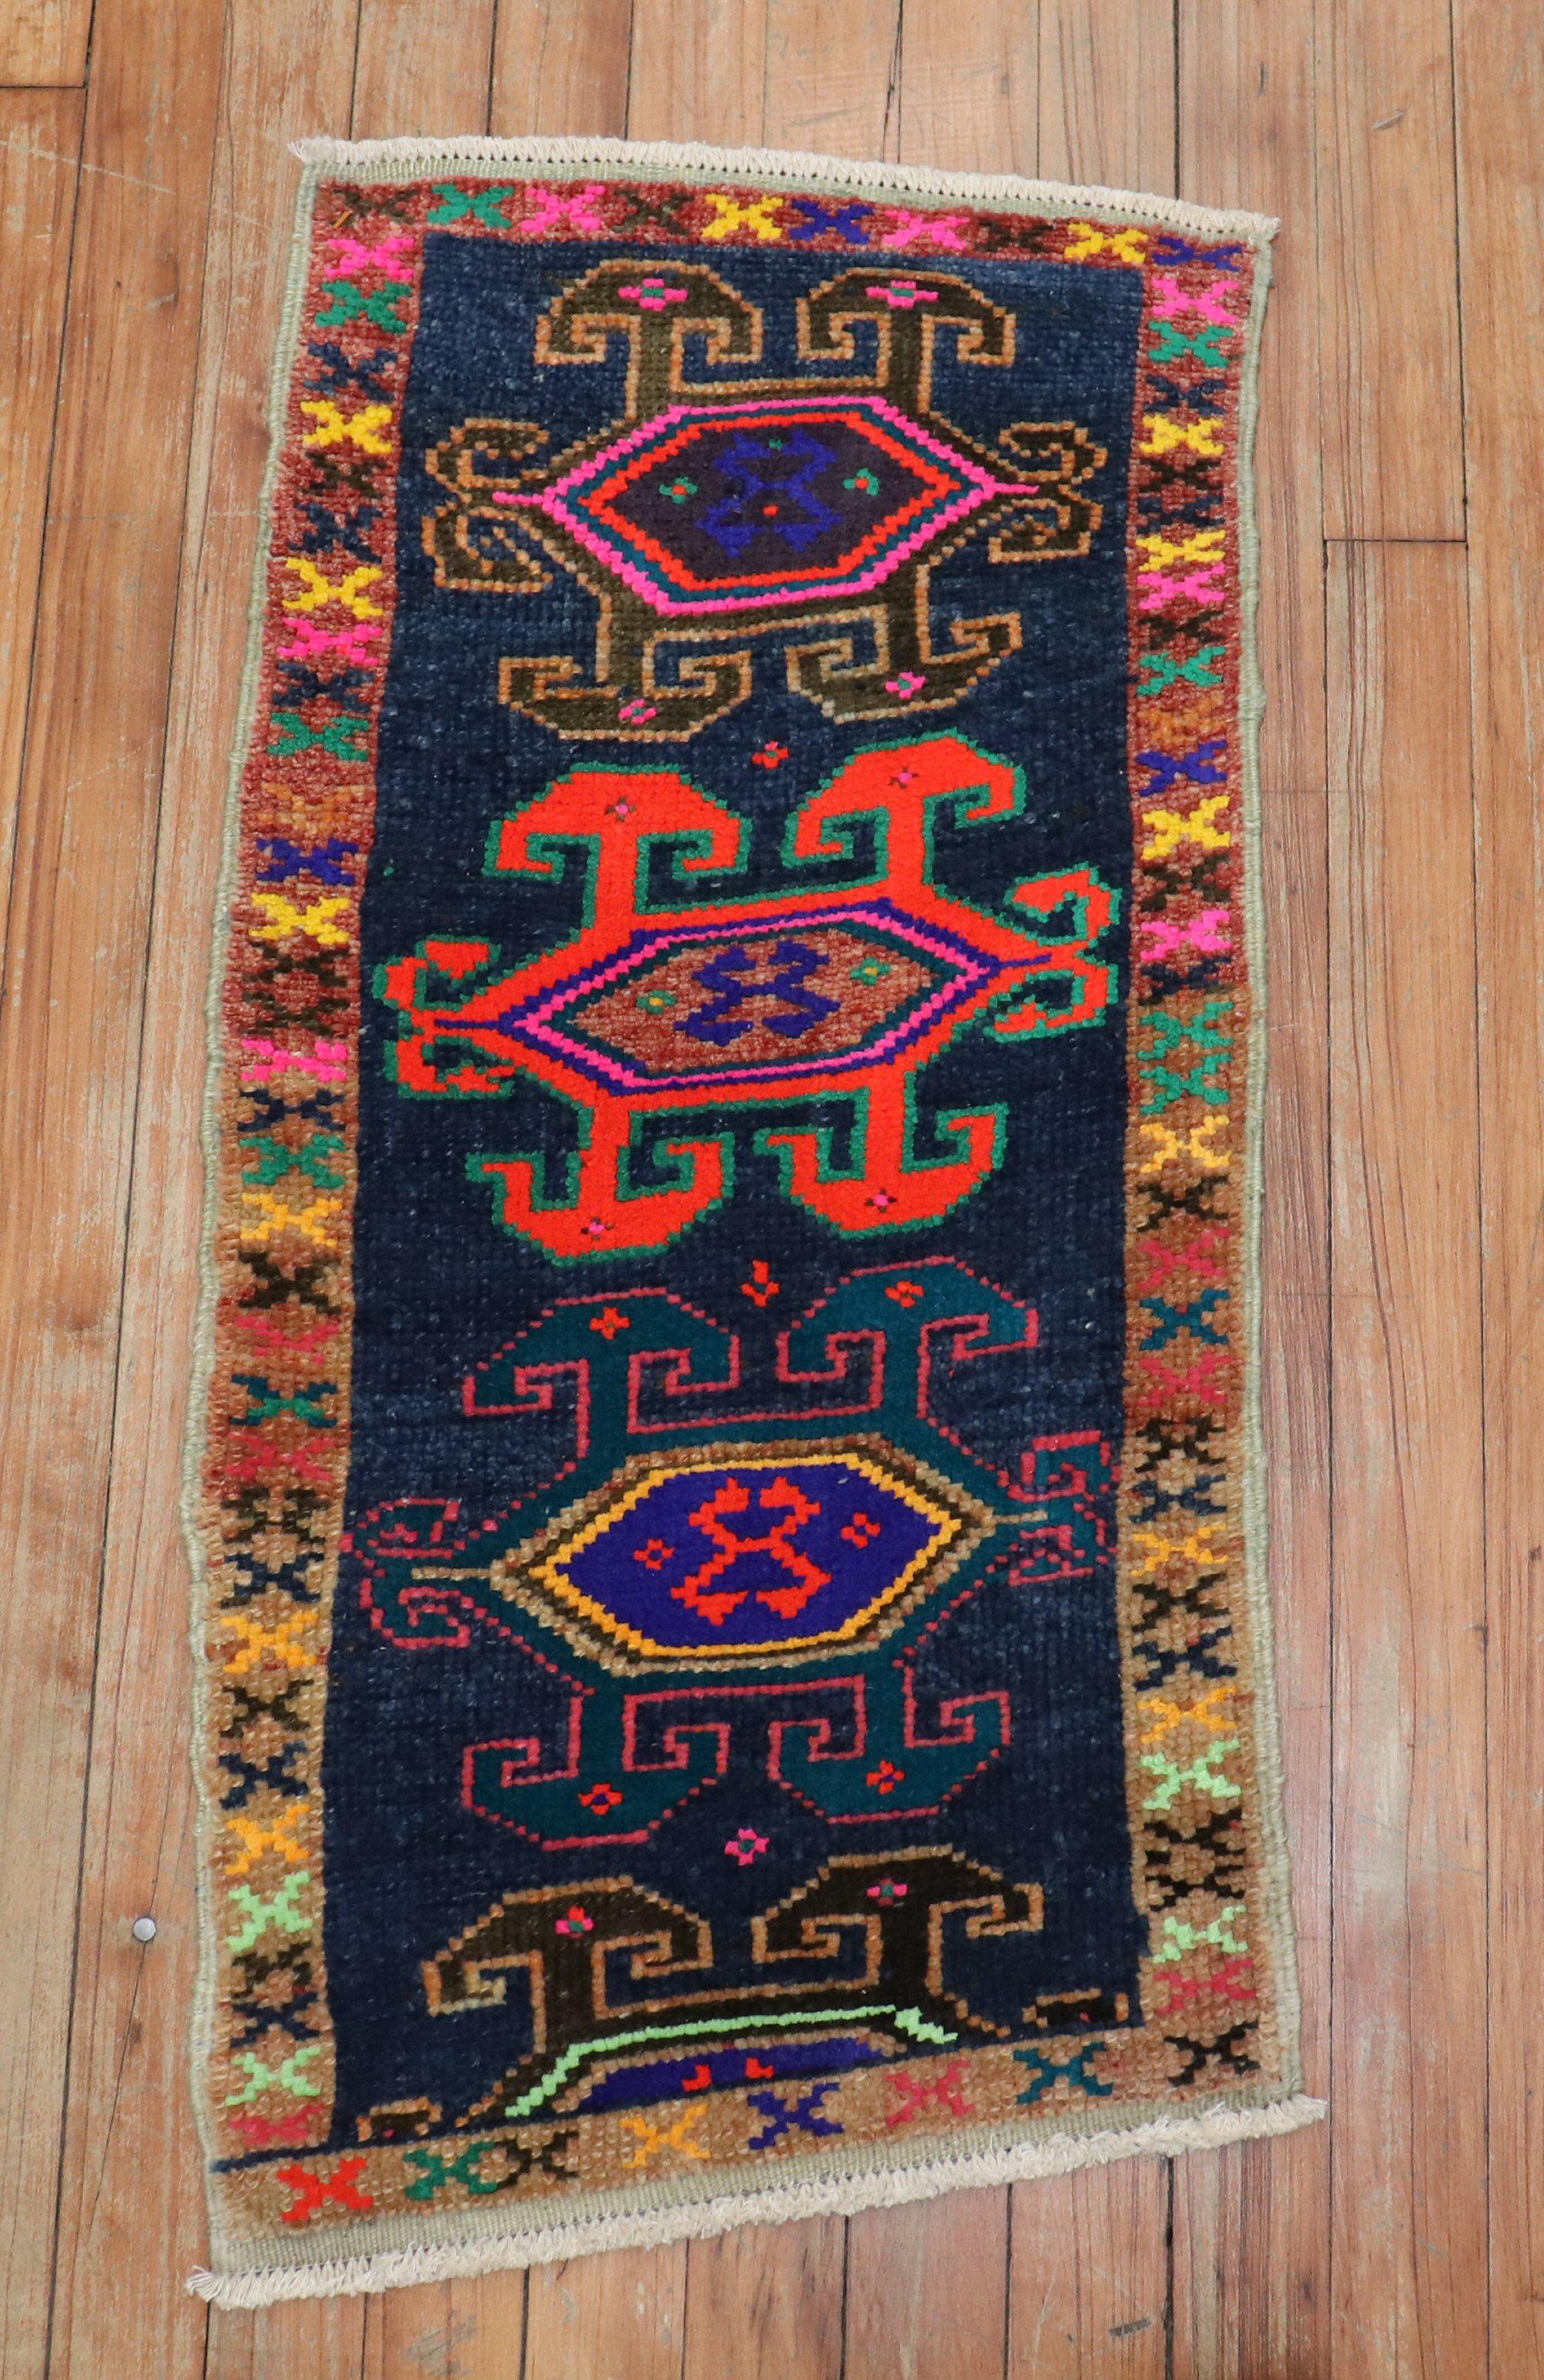 Quirky vintage Turkish Anatolian rug featuring vibrant colors on a charcoal field

Measures: 1'4' x 2'9